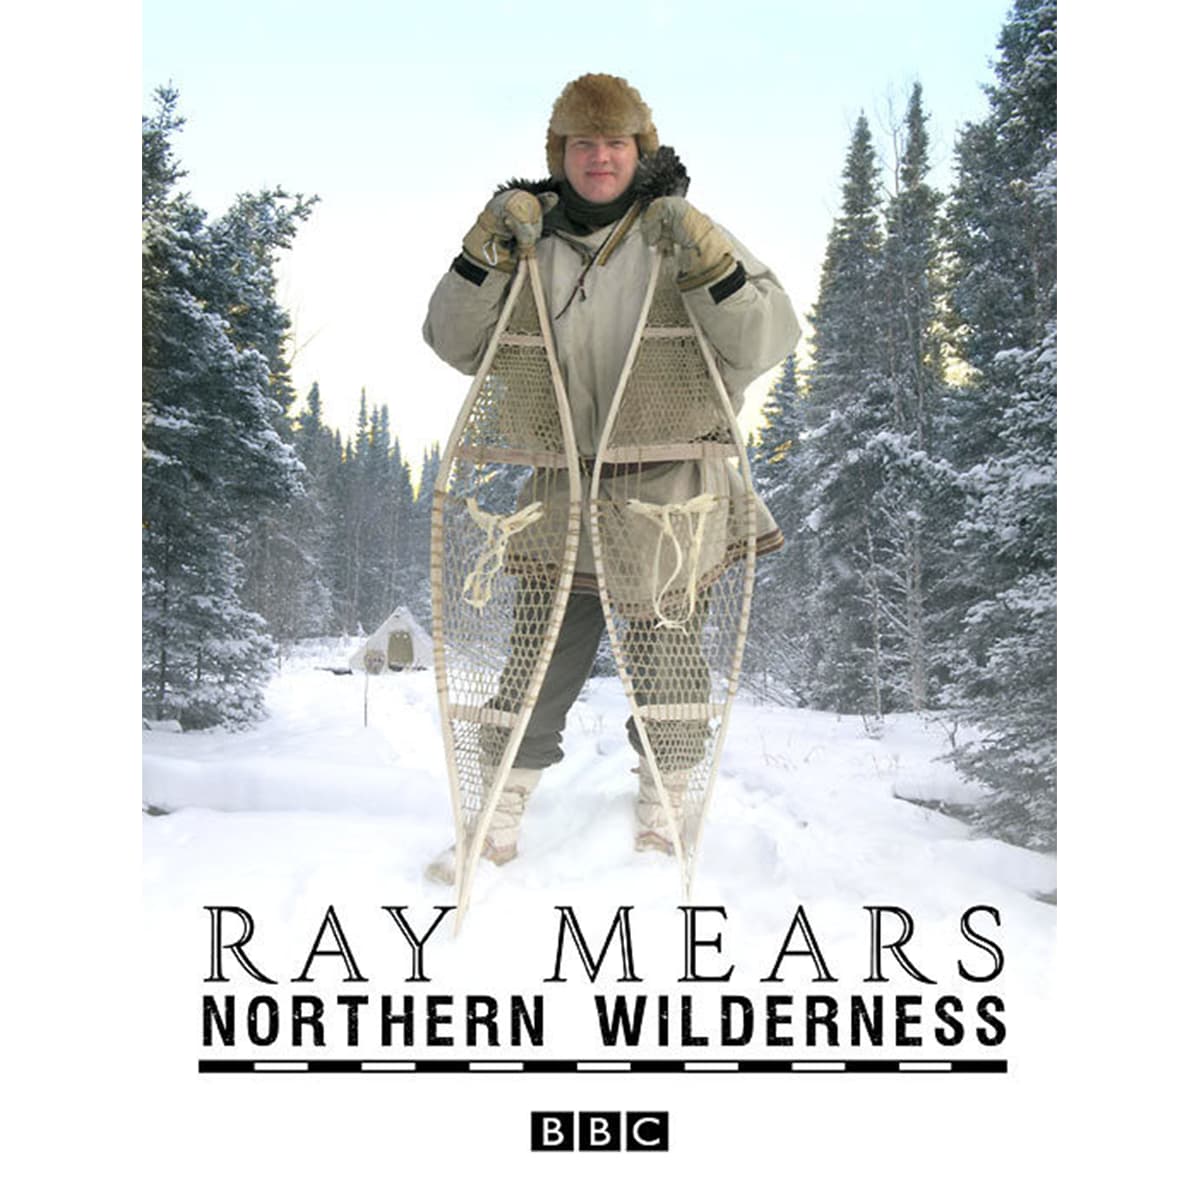 Ray Mears Northern Wilderness